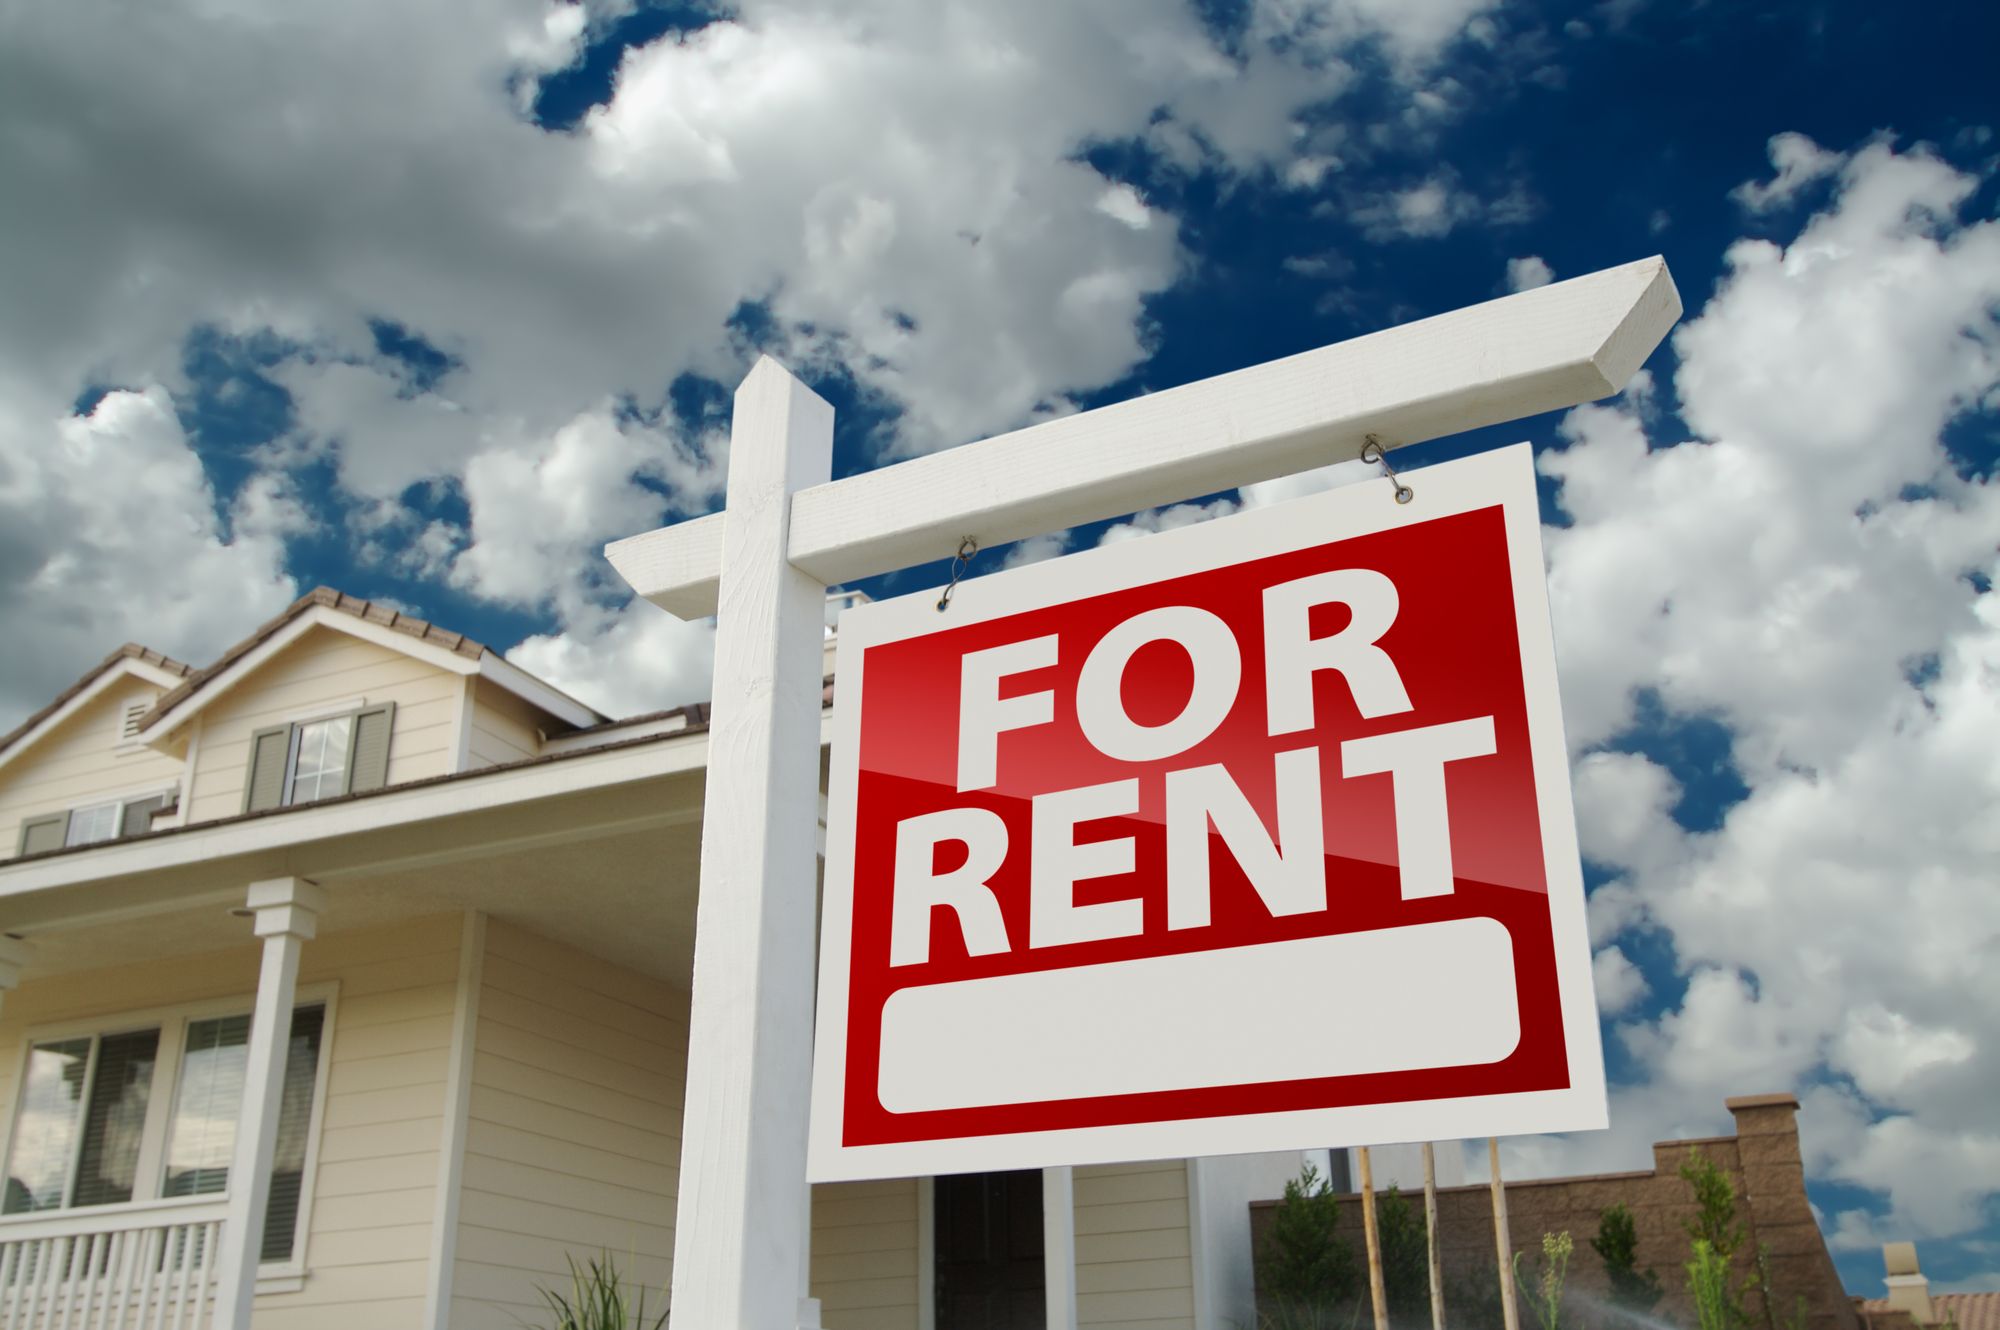 How to Advertise a Rental Property in Nevada